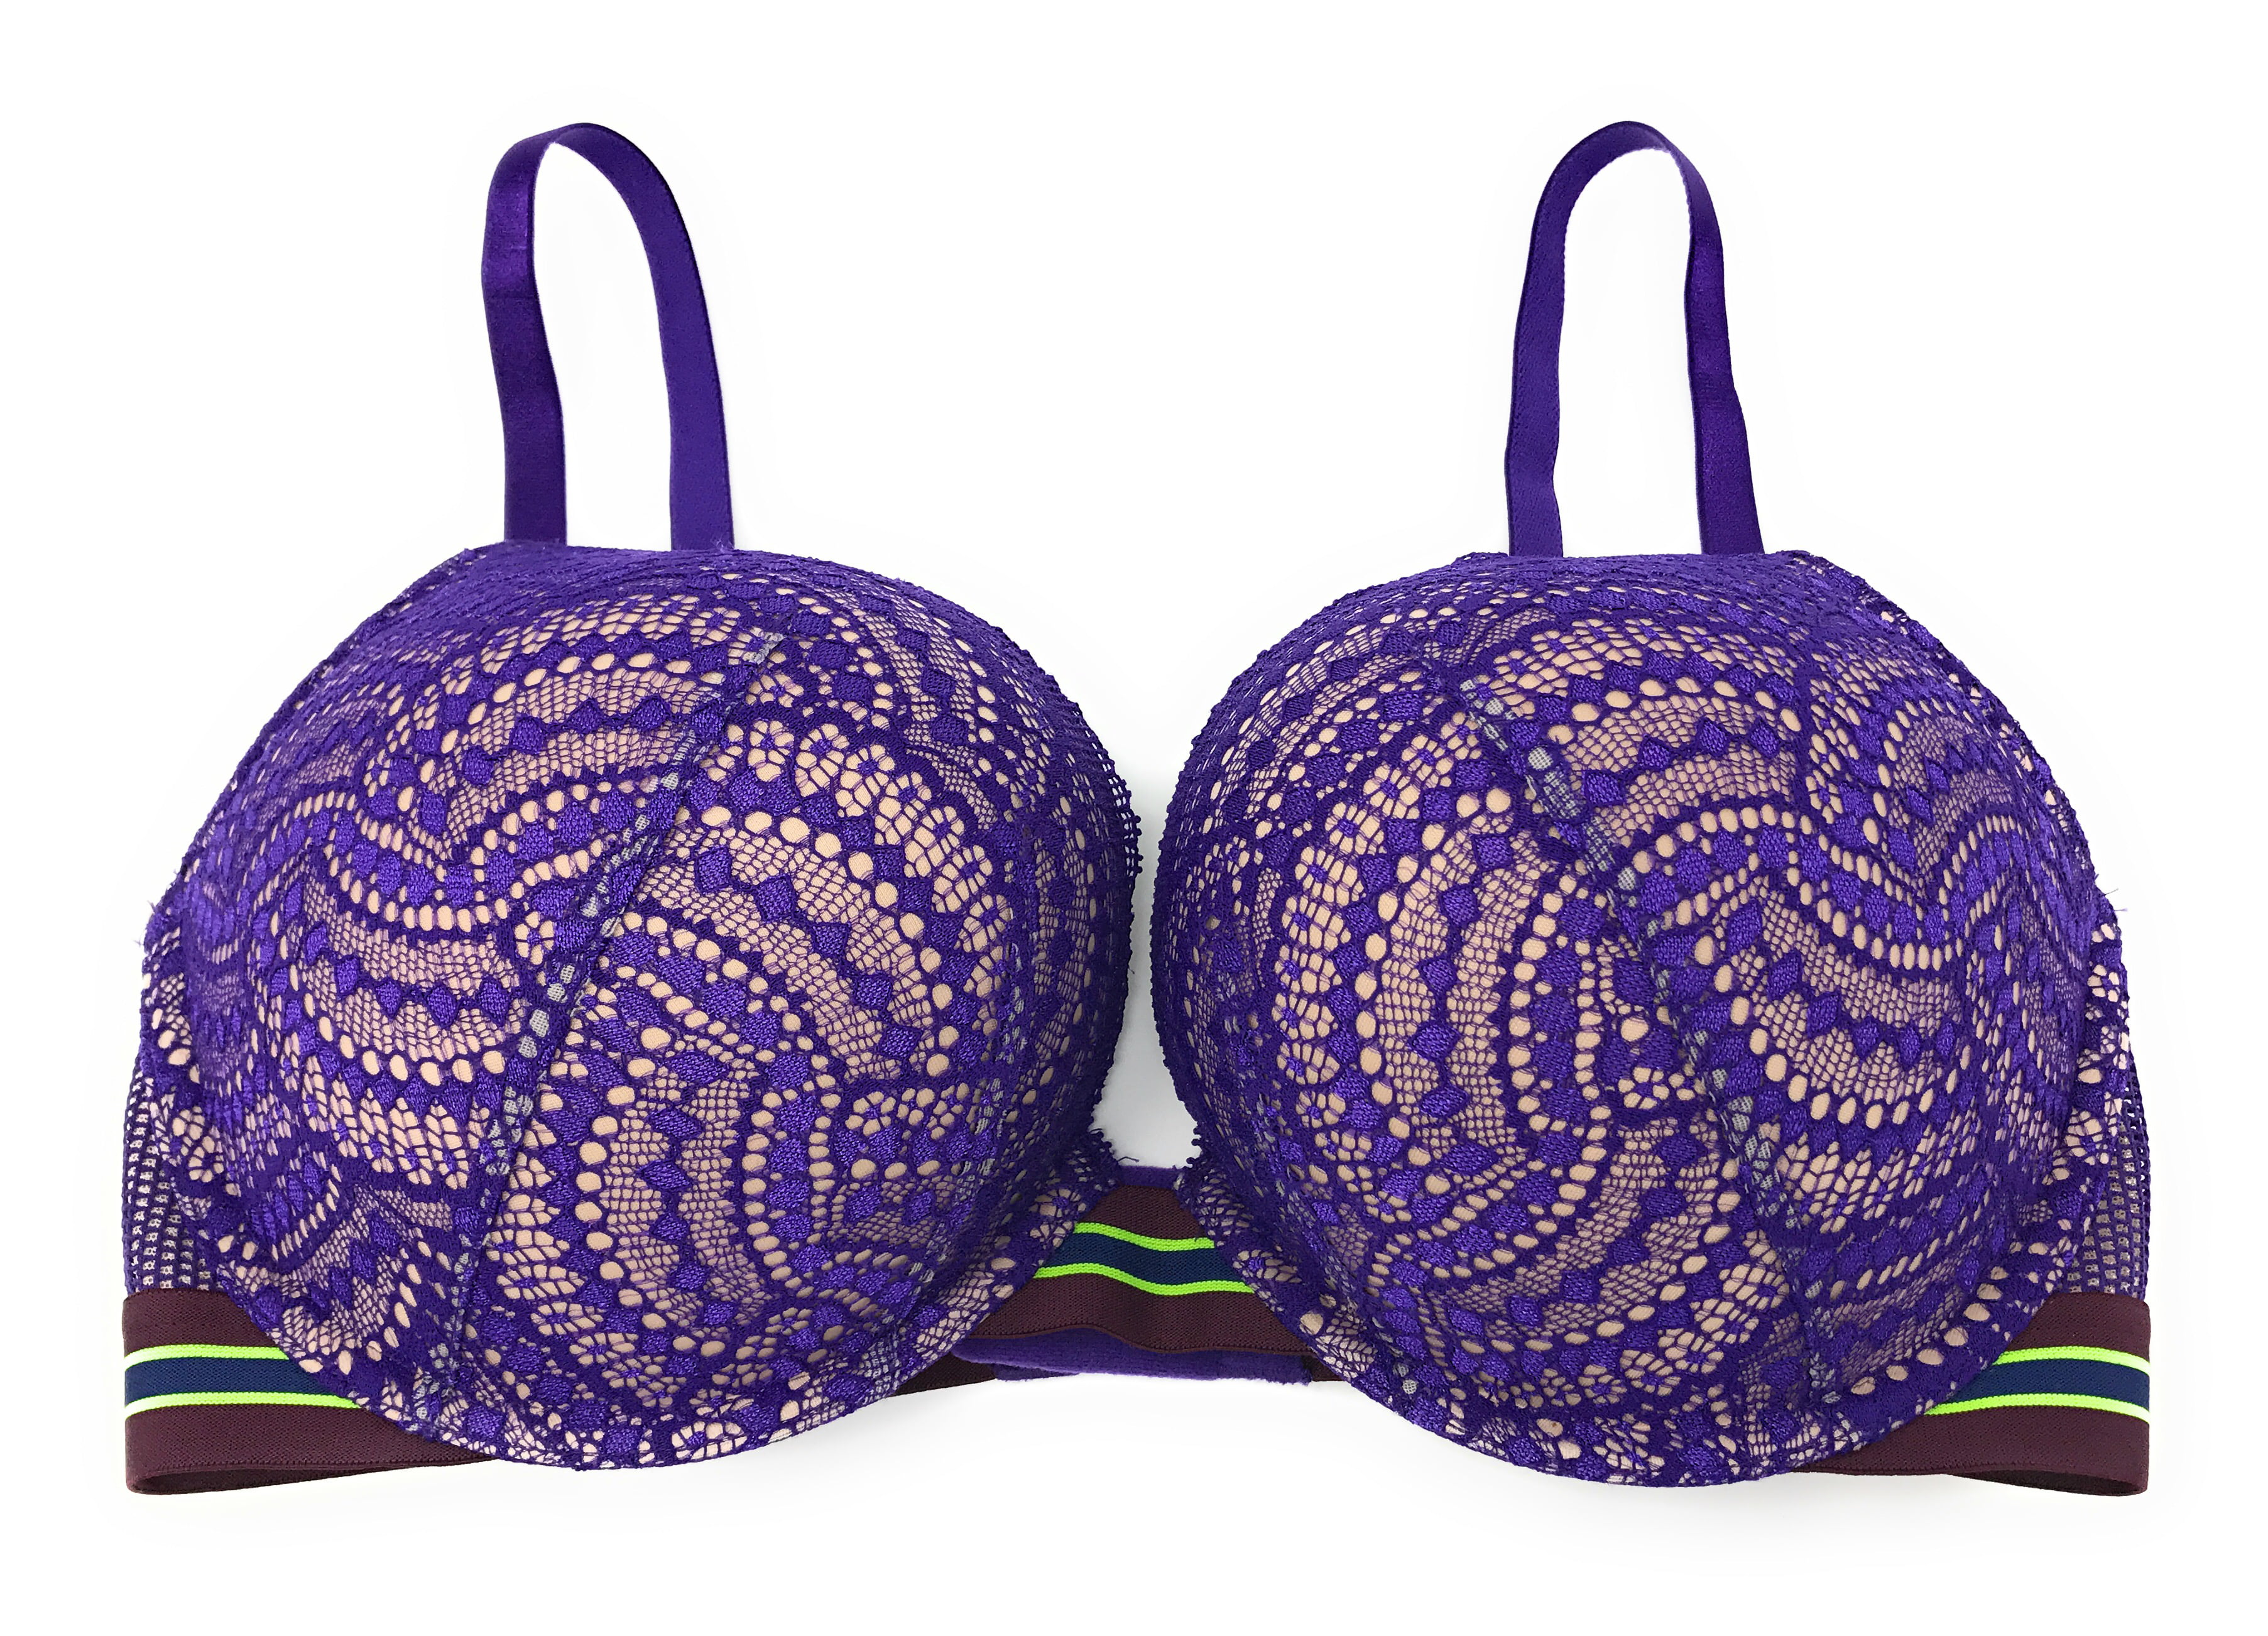 VICTORIA SECRET BRA Bombshell Push Up Adds 2 Cup Sizes Mauve Solid Very  Sexy New $59.84 - PicClick